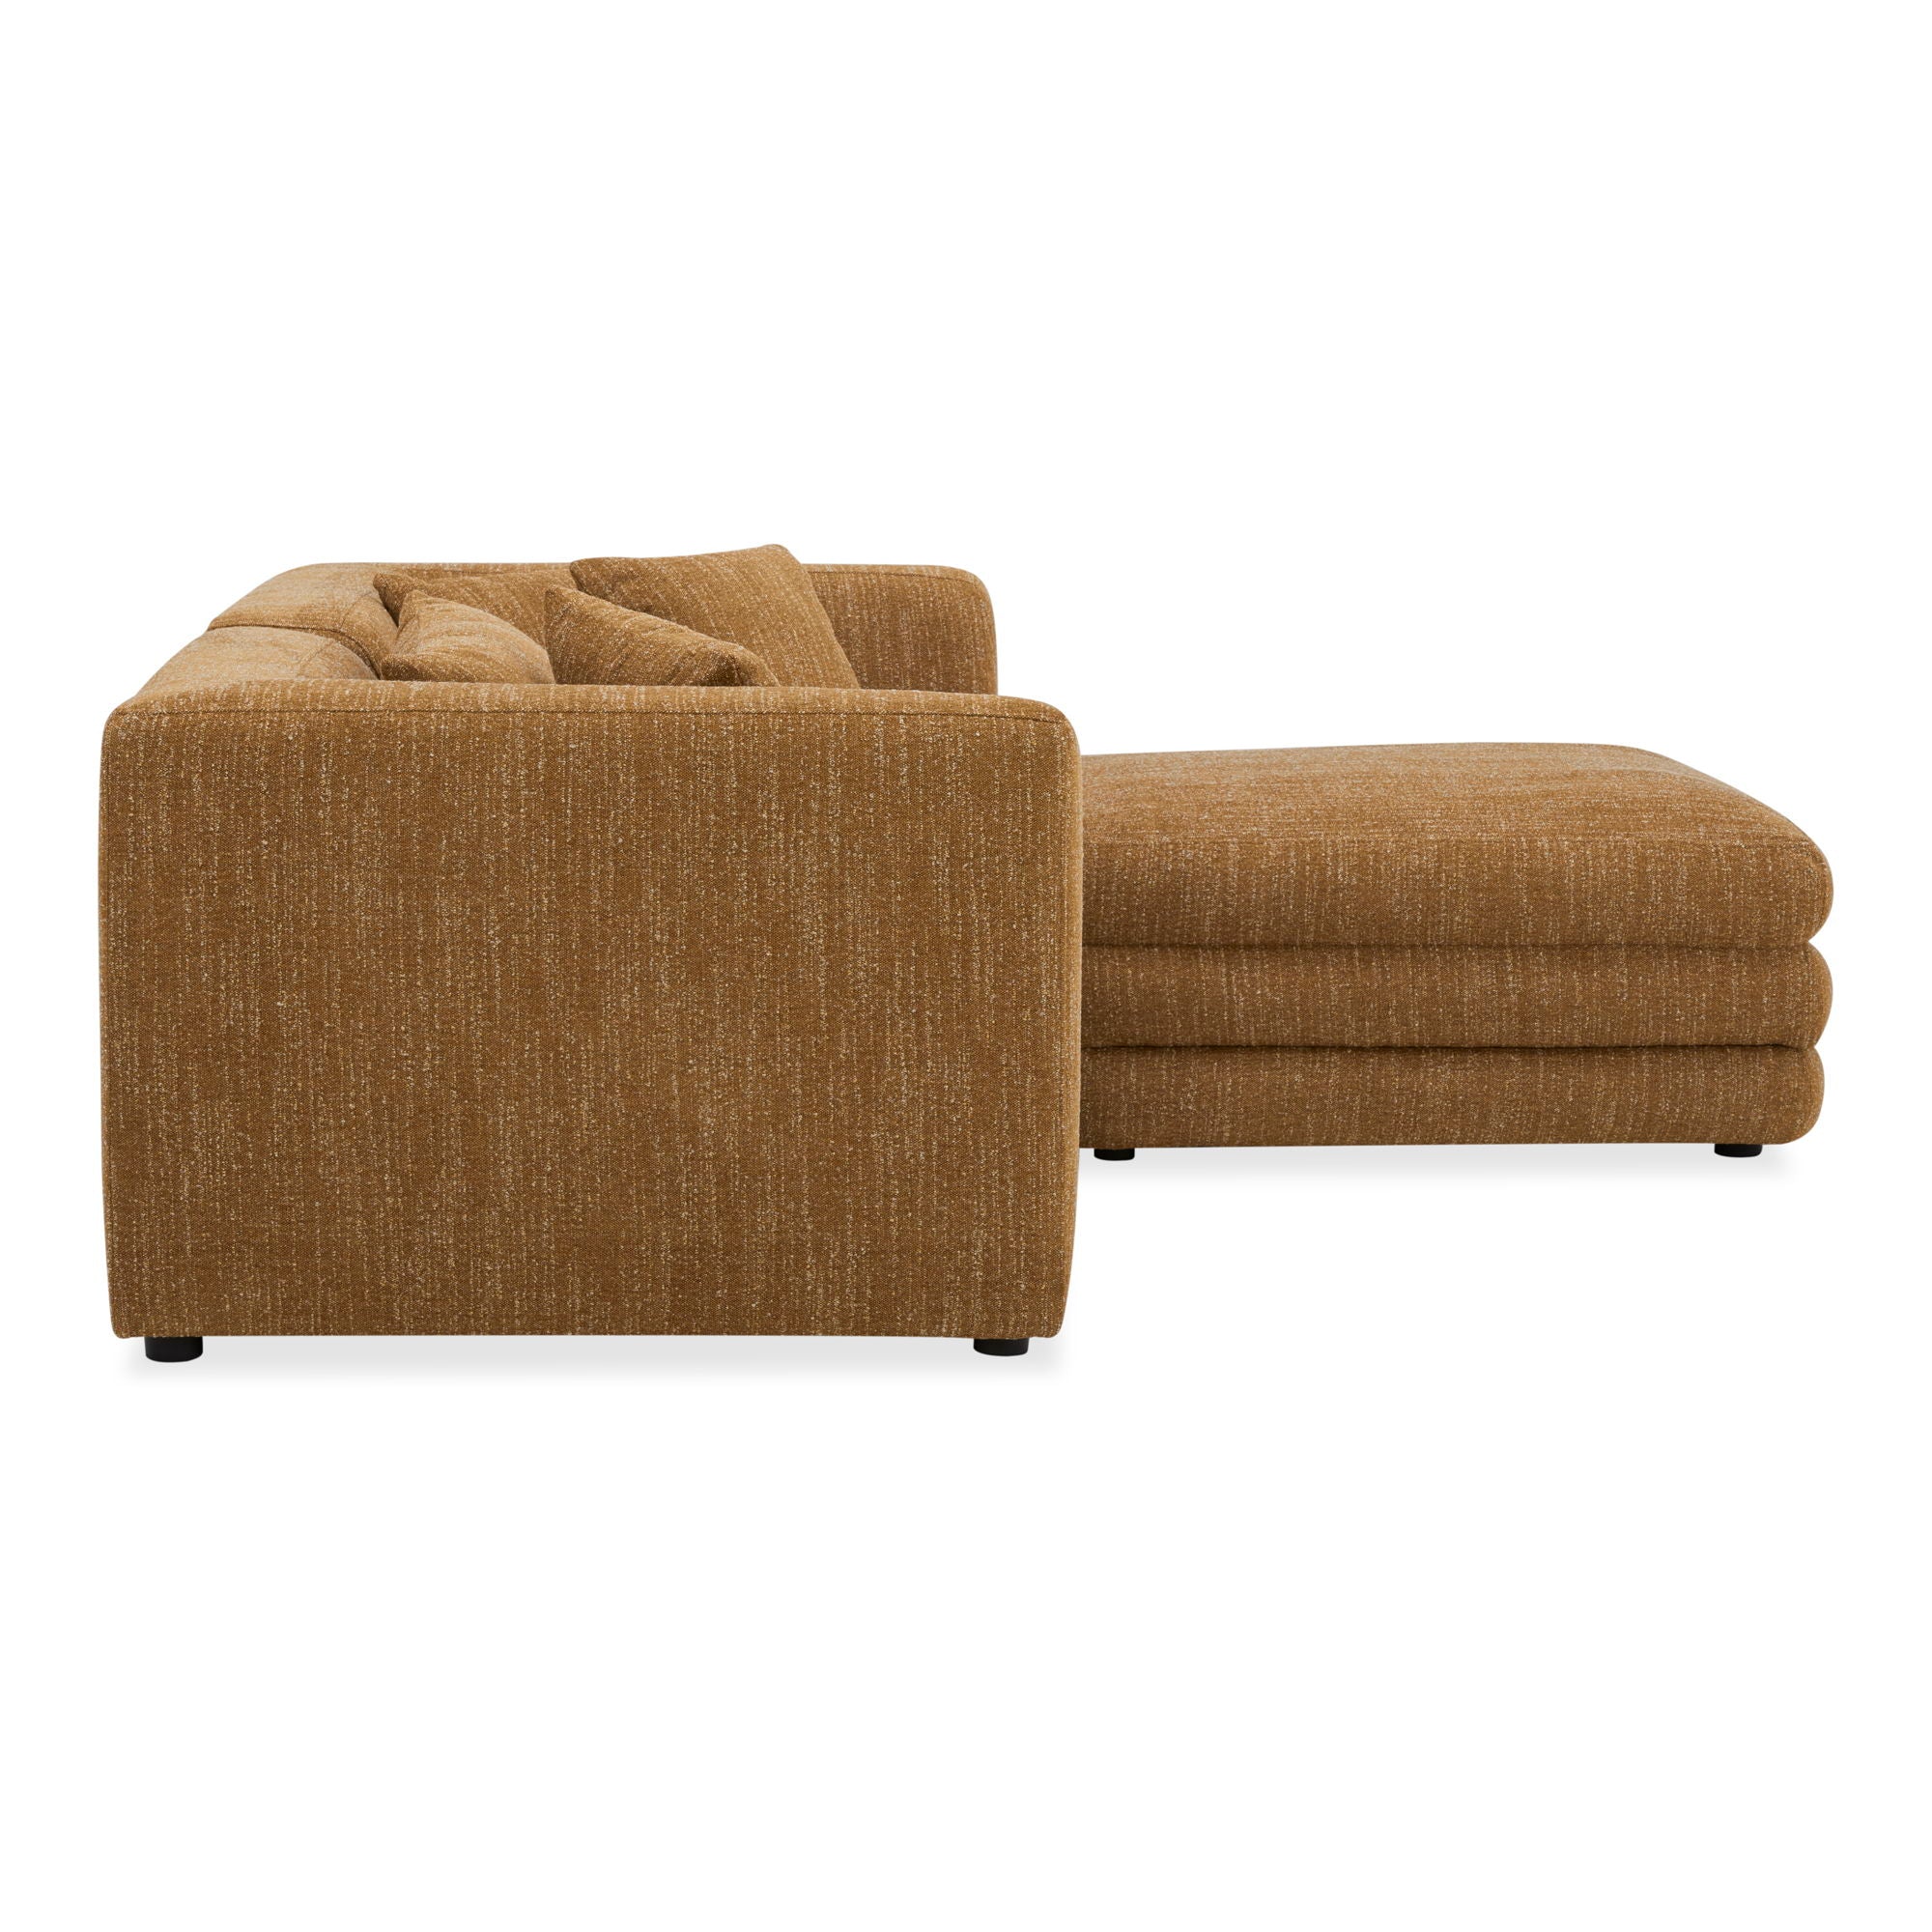 Lowtide - Nook Modular Sectional - Amber Glow-Stationary Sectionals-American Furniture Outlet